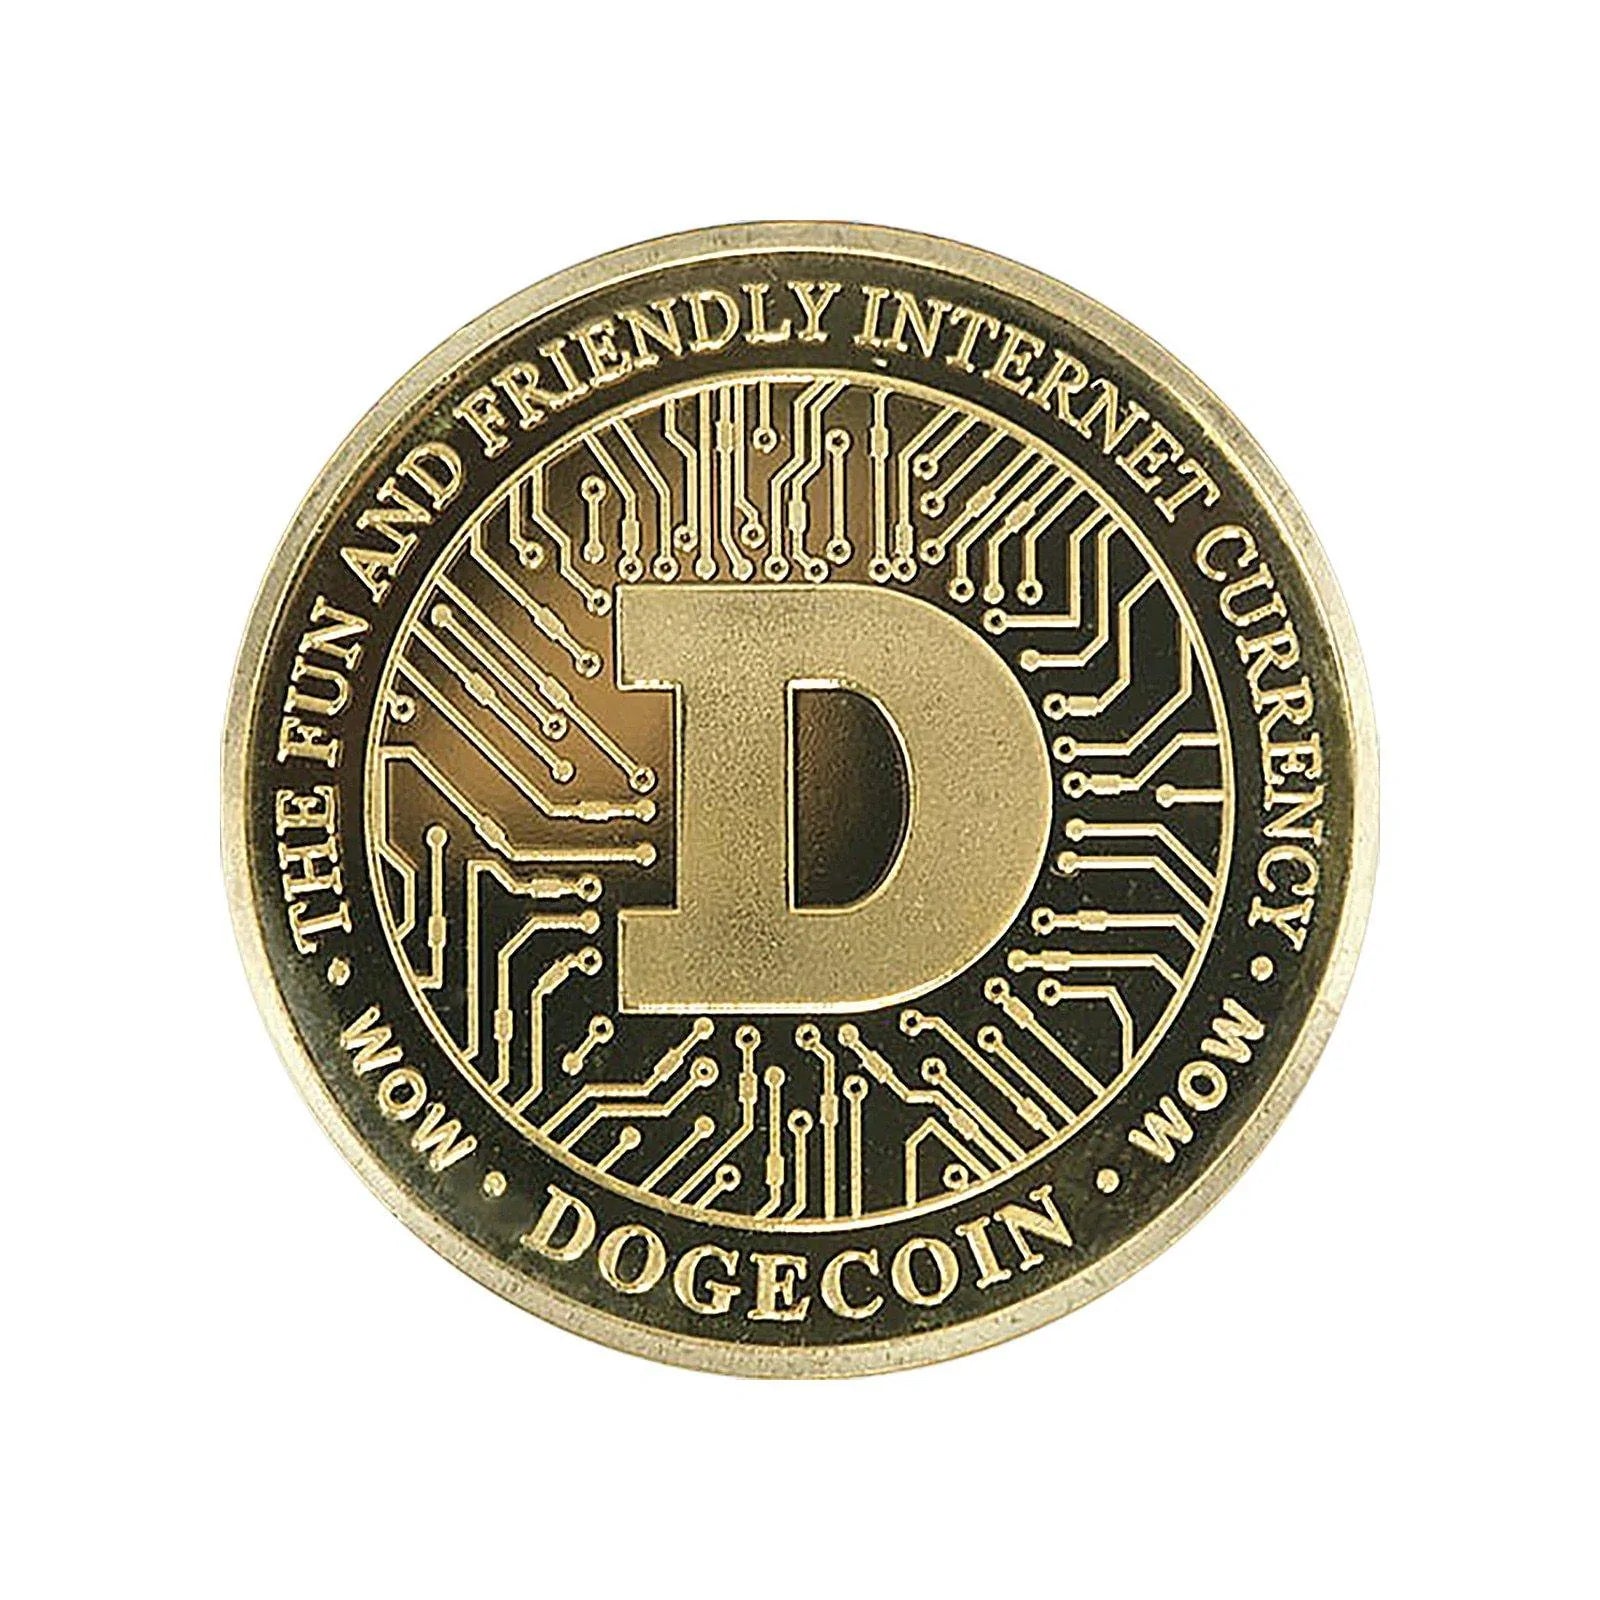 Limited Edition Collectible Commemorative Coin Plated Dogecoin - Buy Confidently with Smart Sales Australia